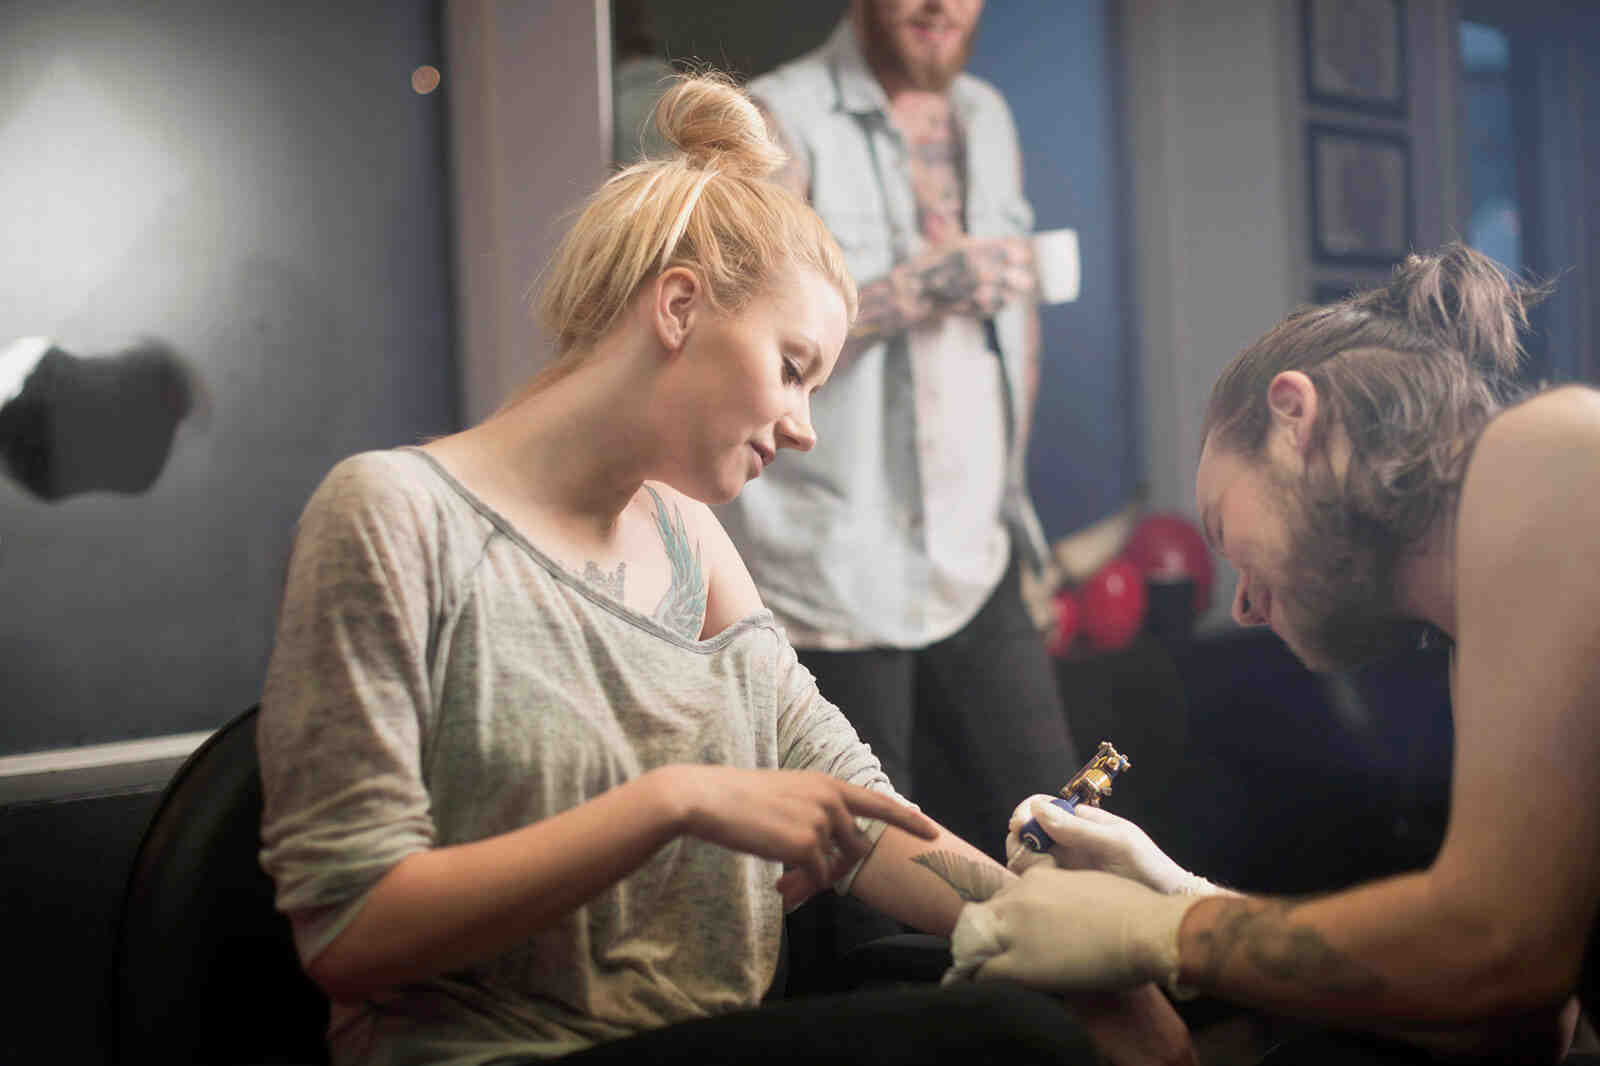 How can you make tattoos hurt less?